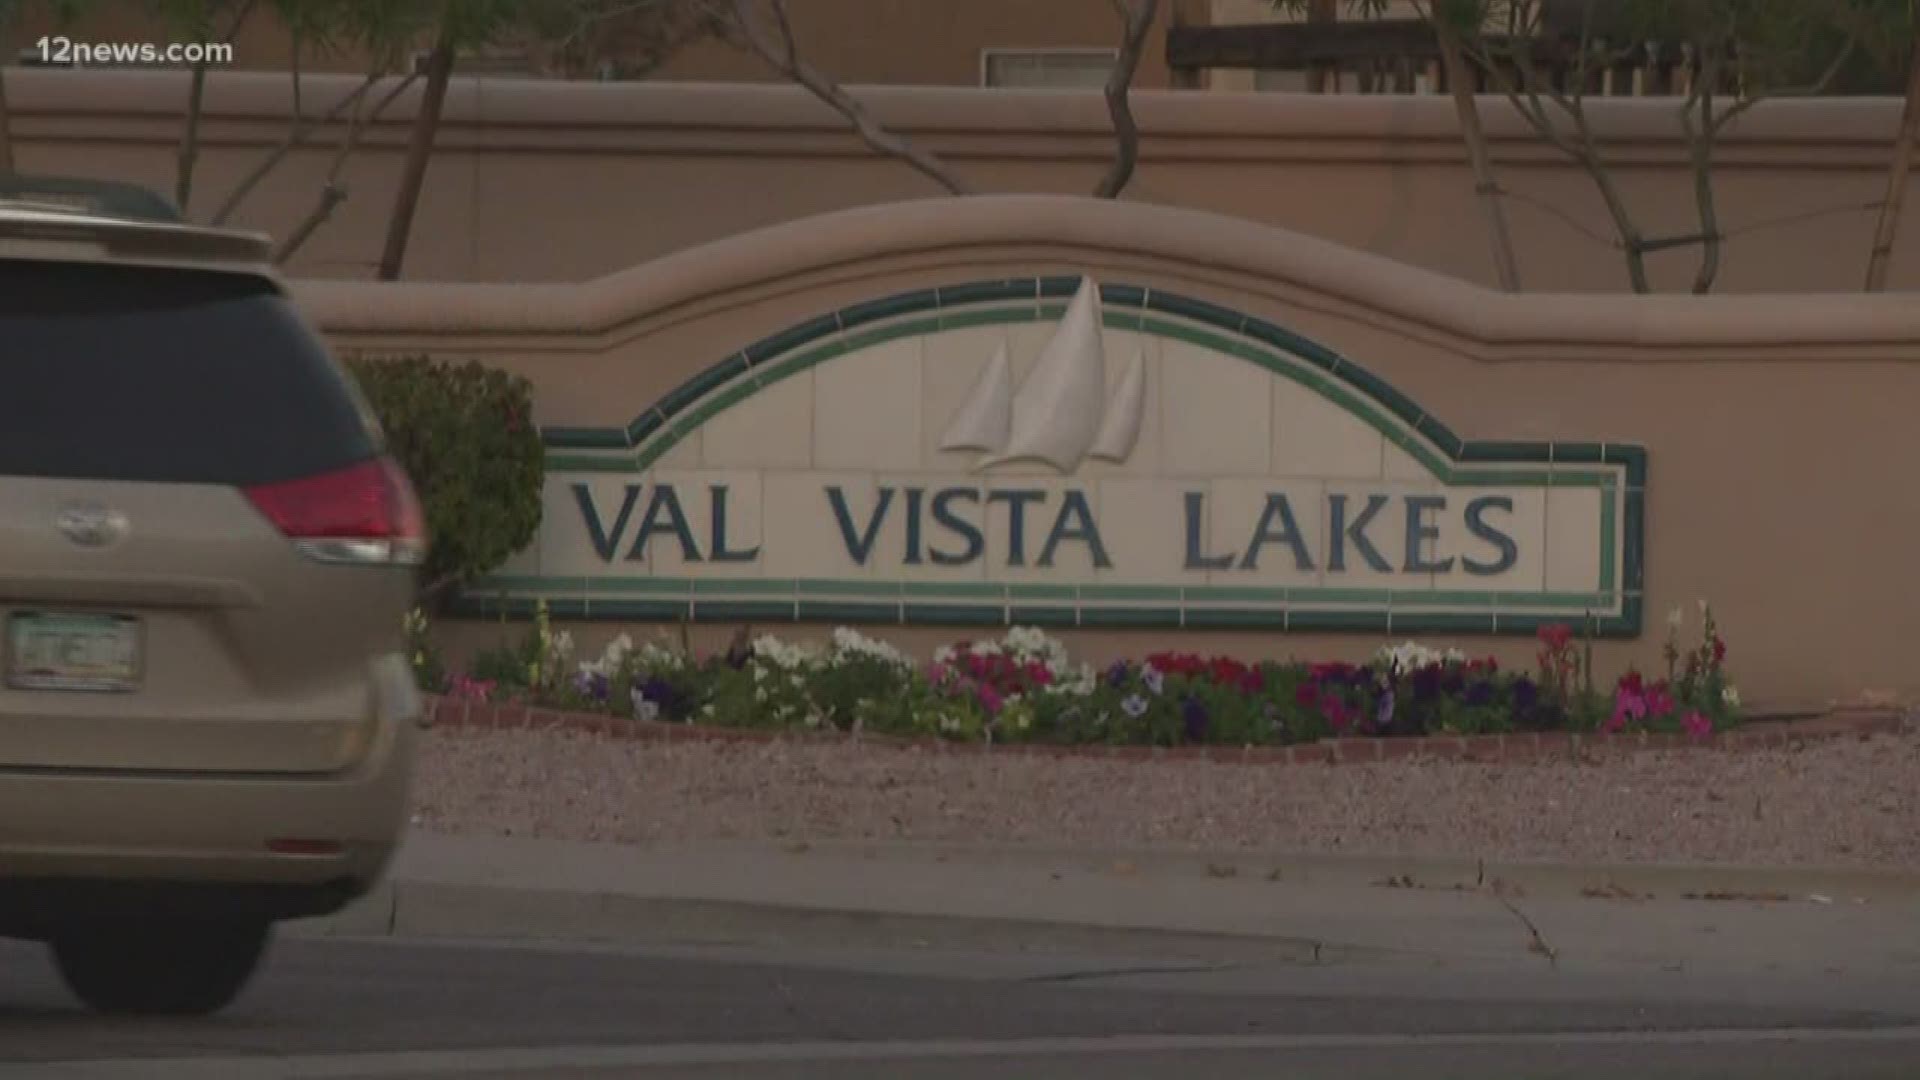 The board of Val Vista Lakes sent out letters to residents accusing posts on a community Facebook page of being defamatory, speculative or untrue of board members.